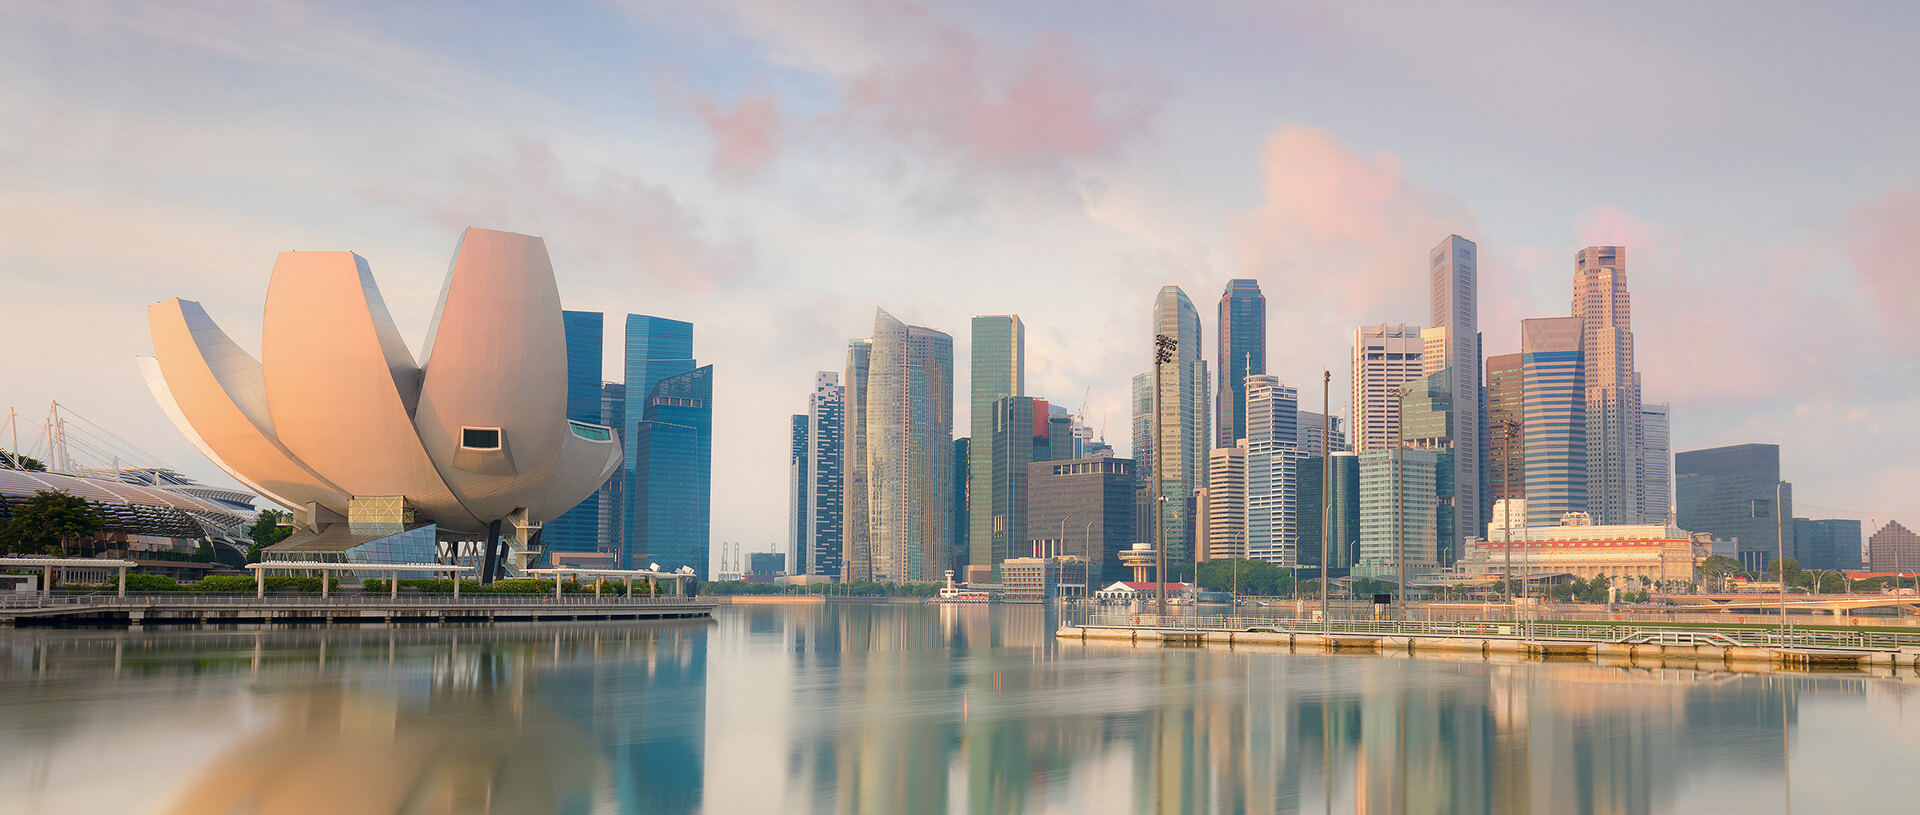 Singapore remains Asia-Pacific's most innovative nation